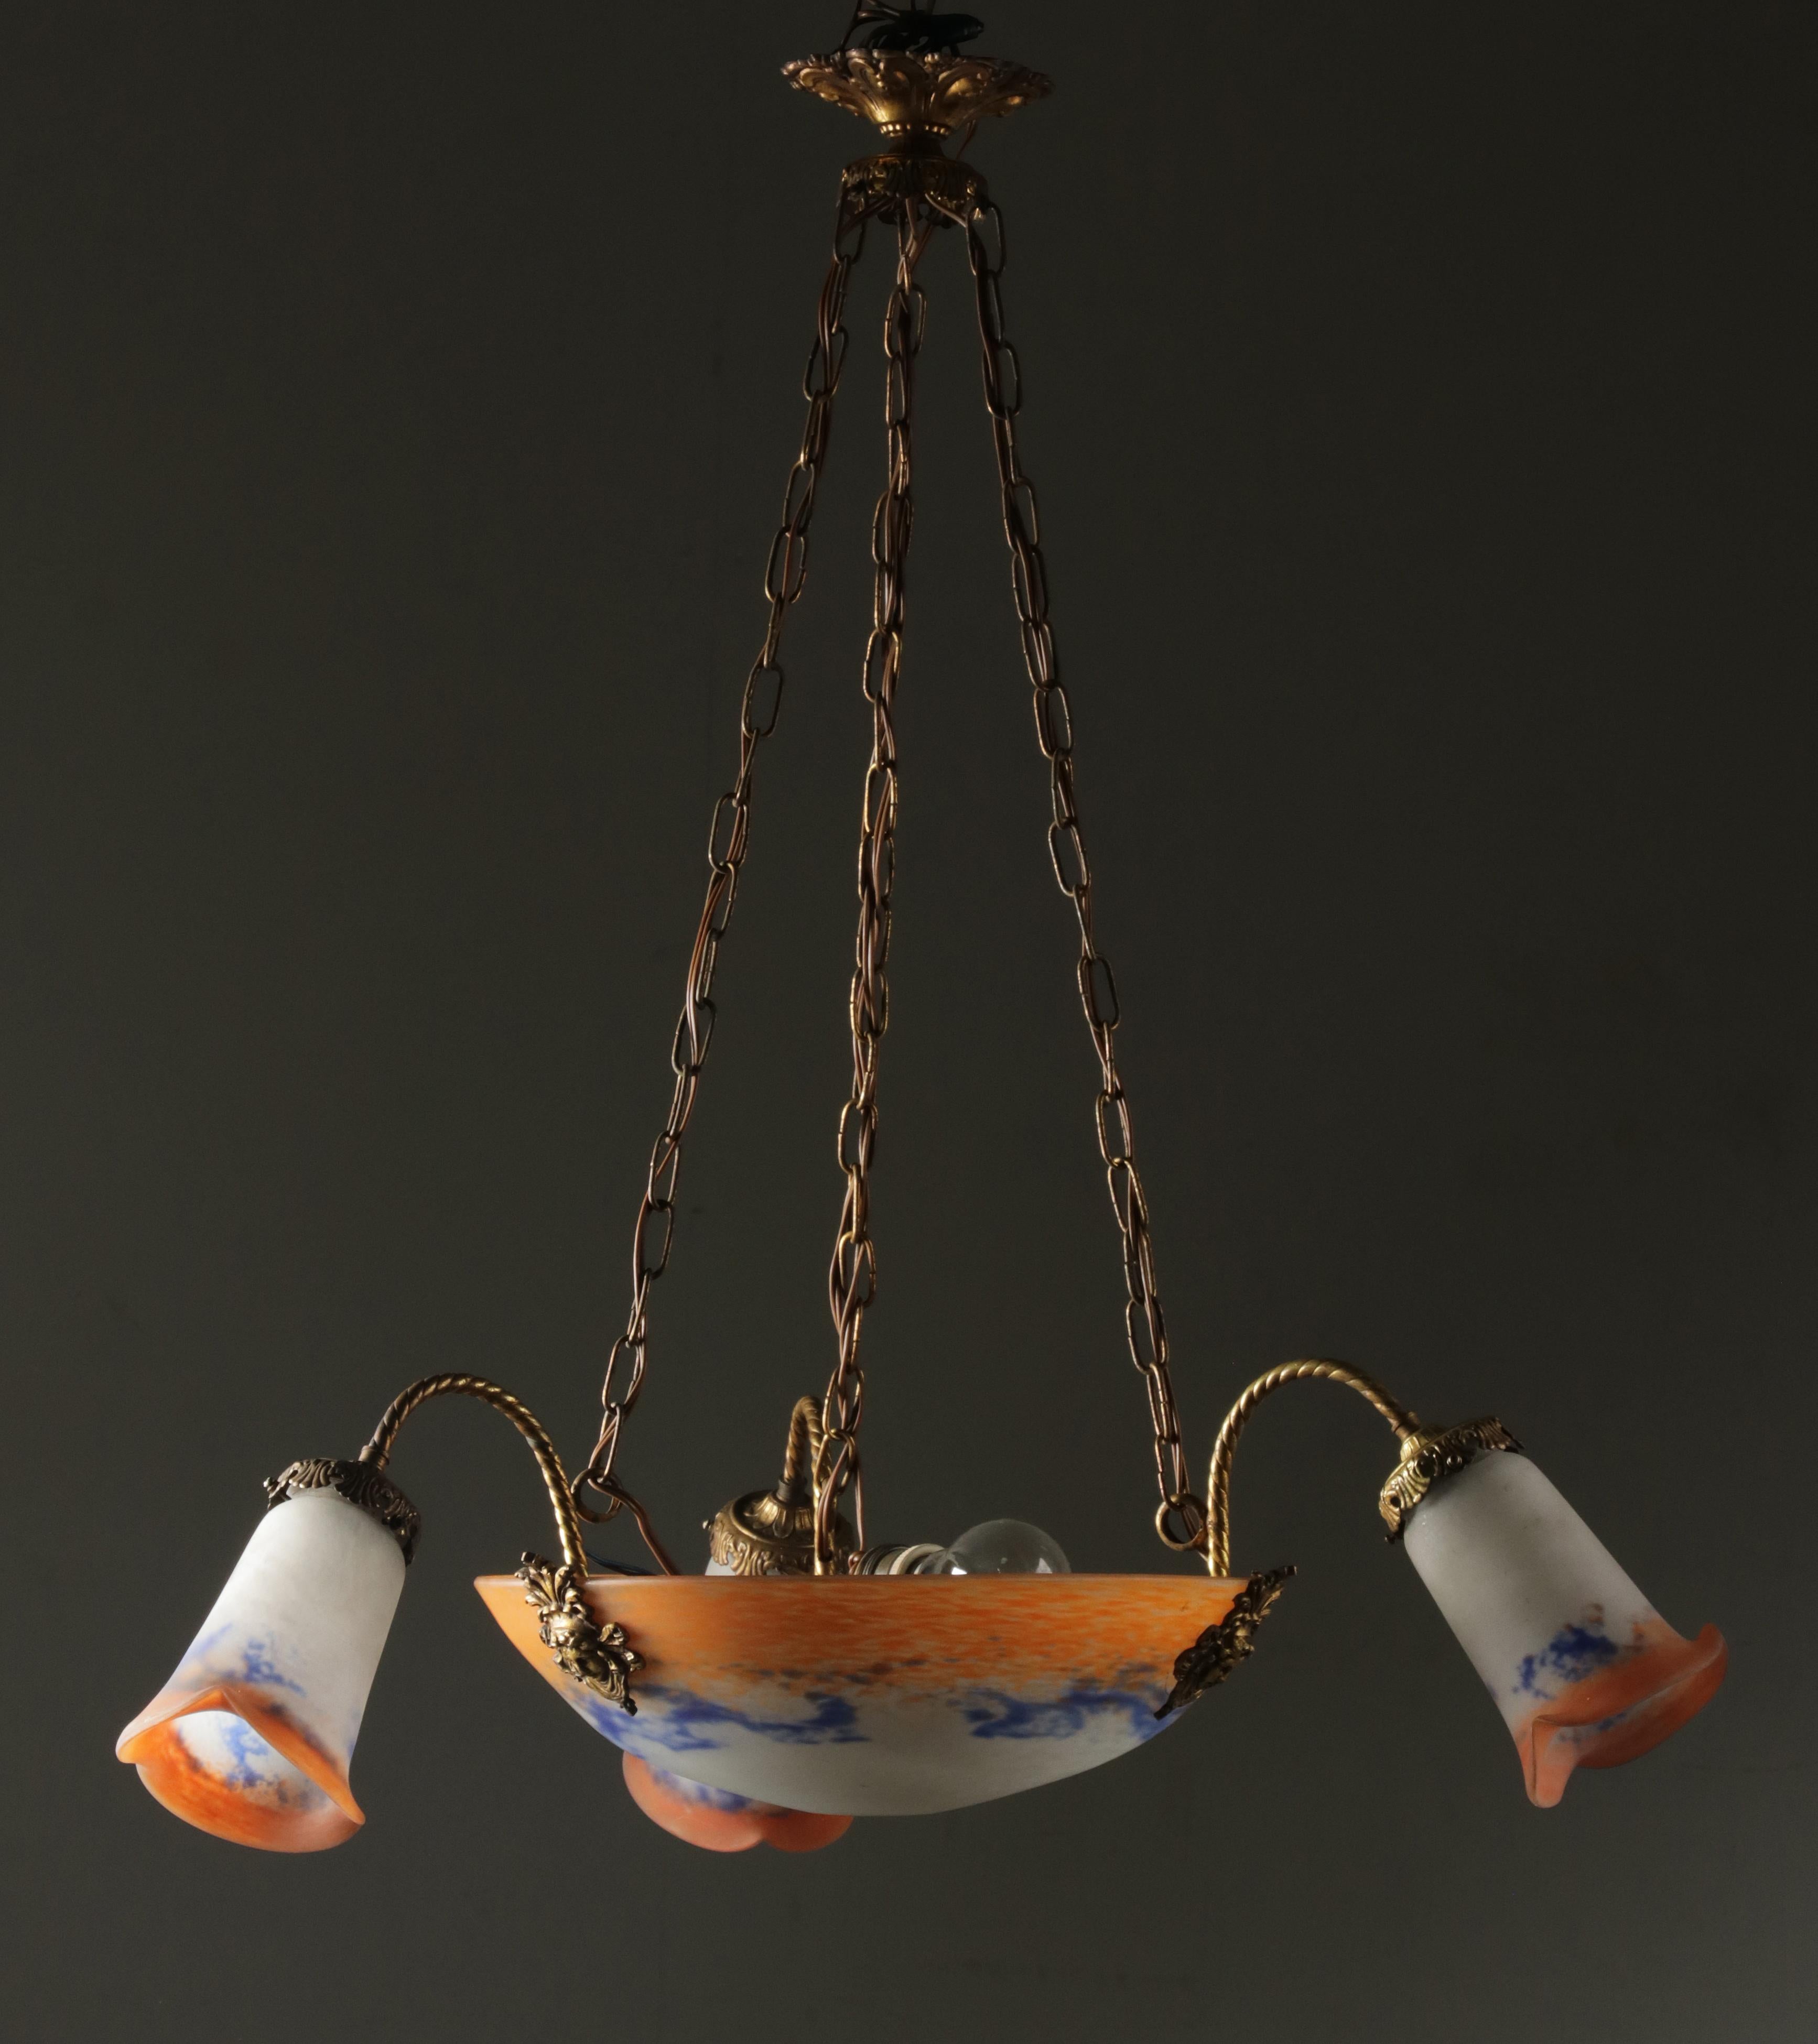 A French Art Deco pendant chandelier by Jean Noverdy, Dijon, France. Made of thick mottled colored paste glass “Pâte de Verre”, signed ”Noverdy France”. The outside fixtures are made of copper. Total four light points (E27 fitting), including the